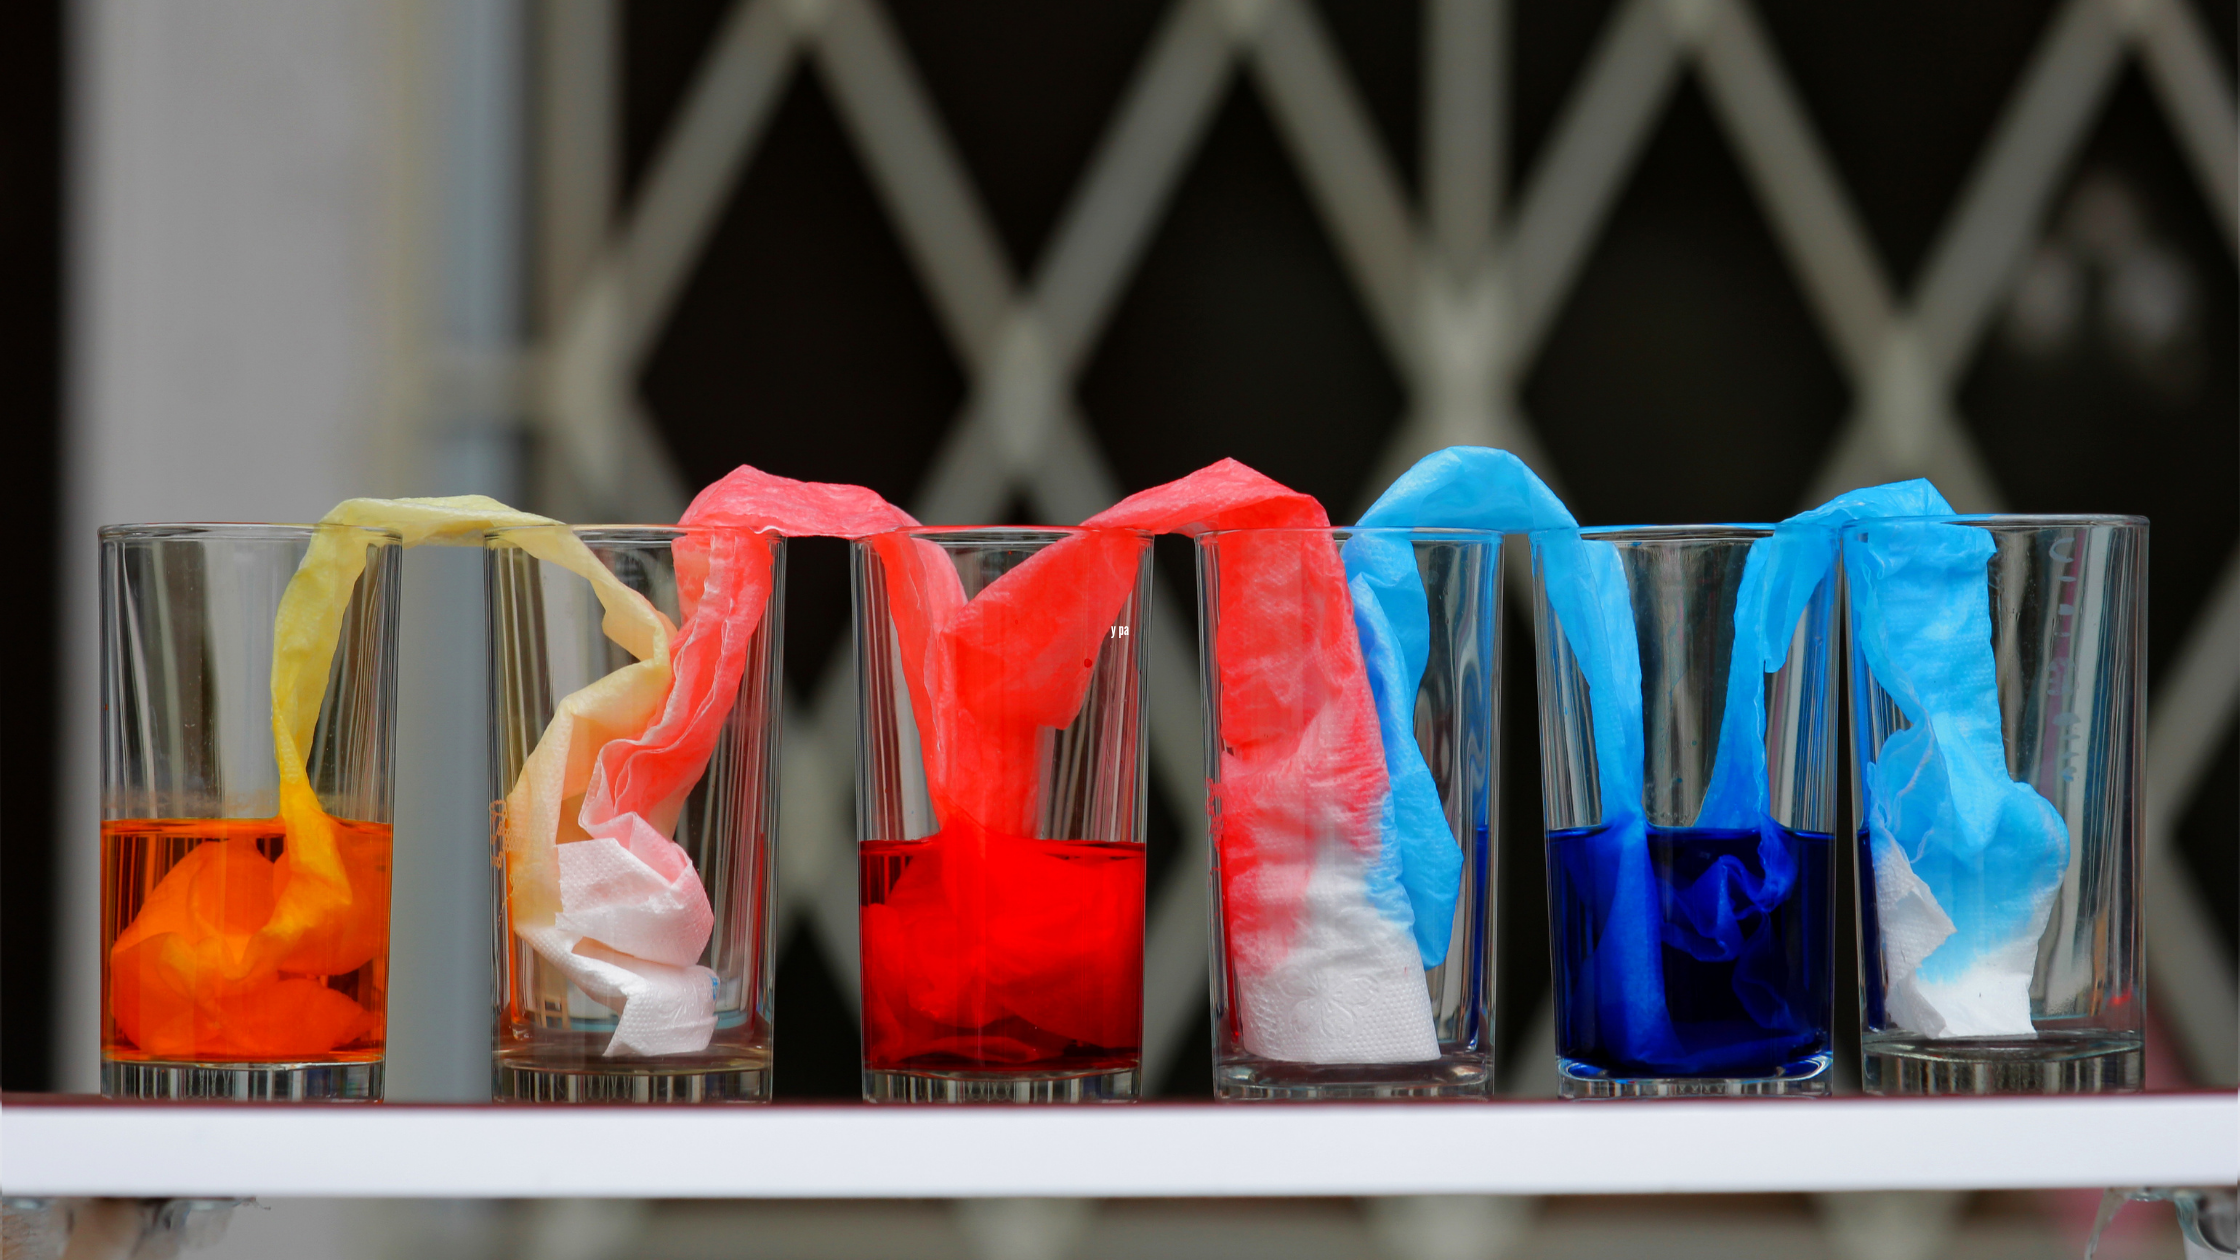 5 Fun & Cool Science Activities with Dye to Do With the Kids 12